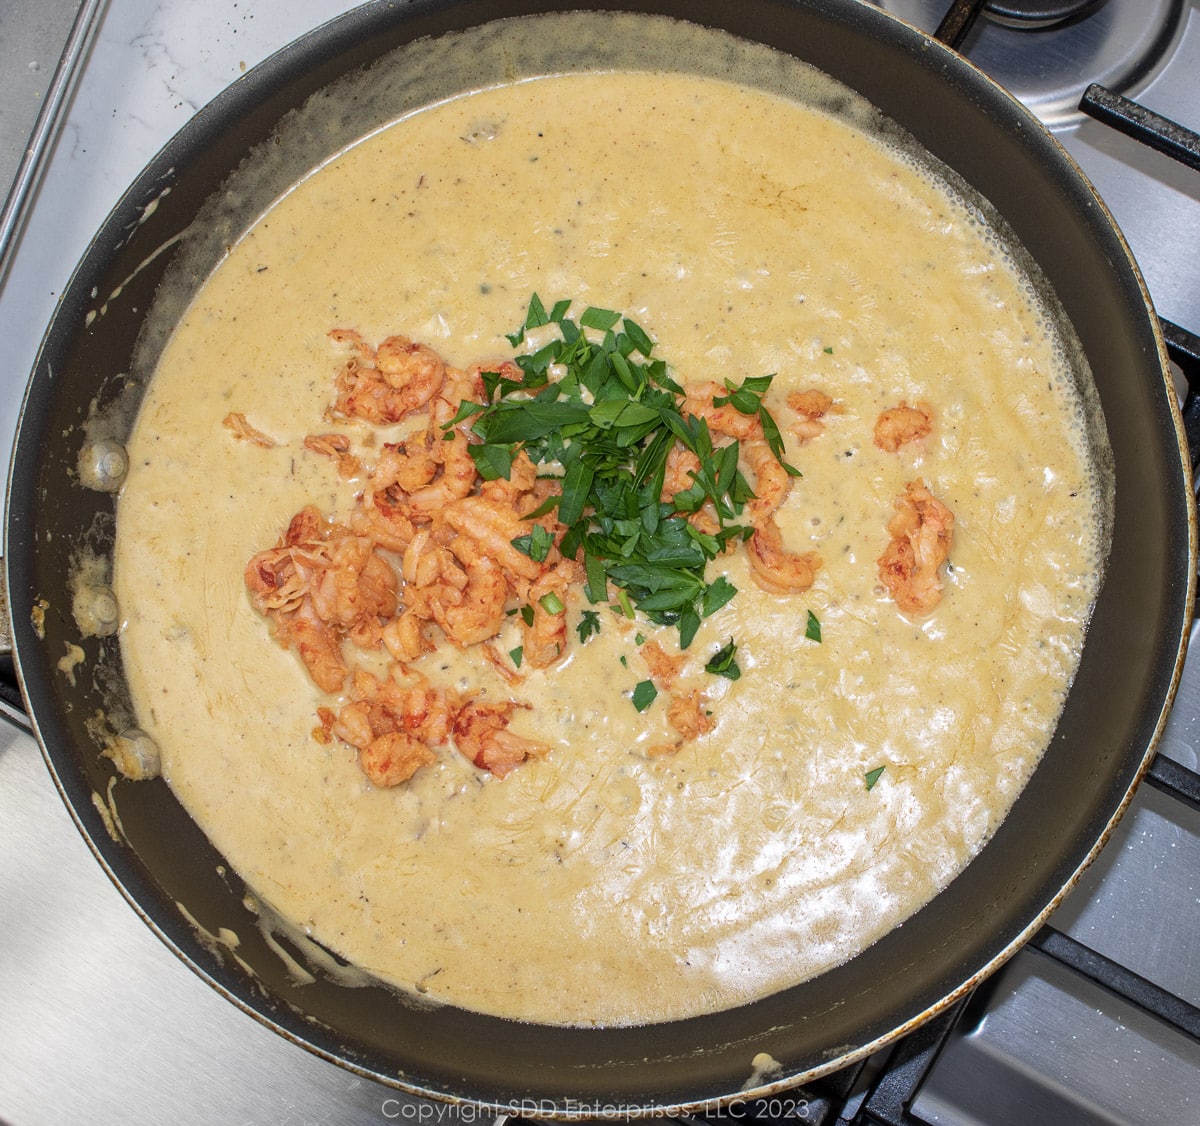 crawfish tails and parsley added to a cream sauce in a saute pan